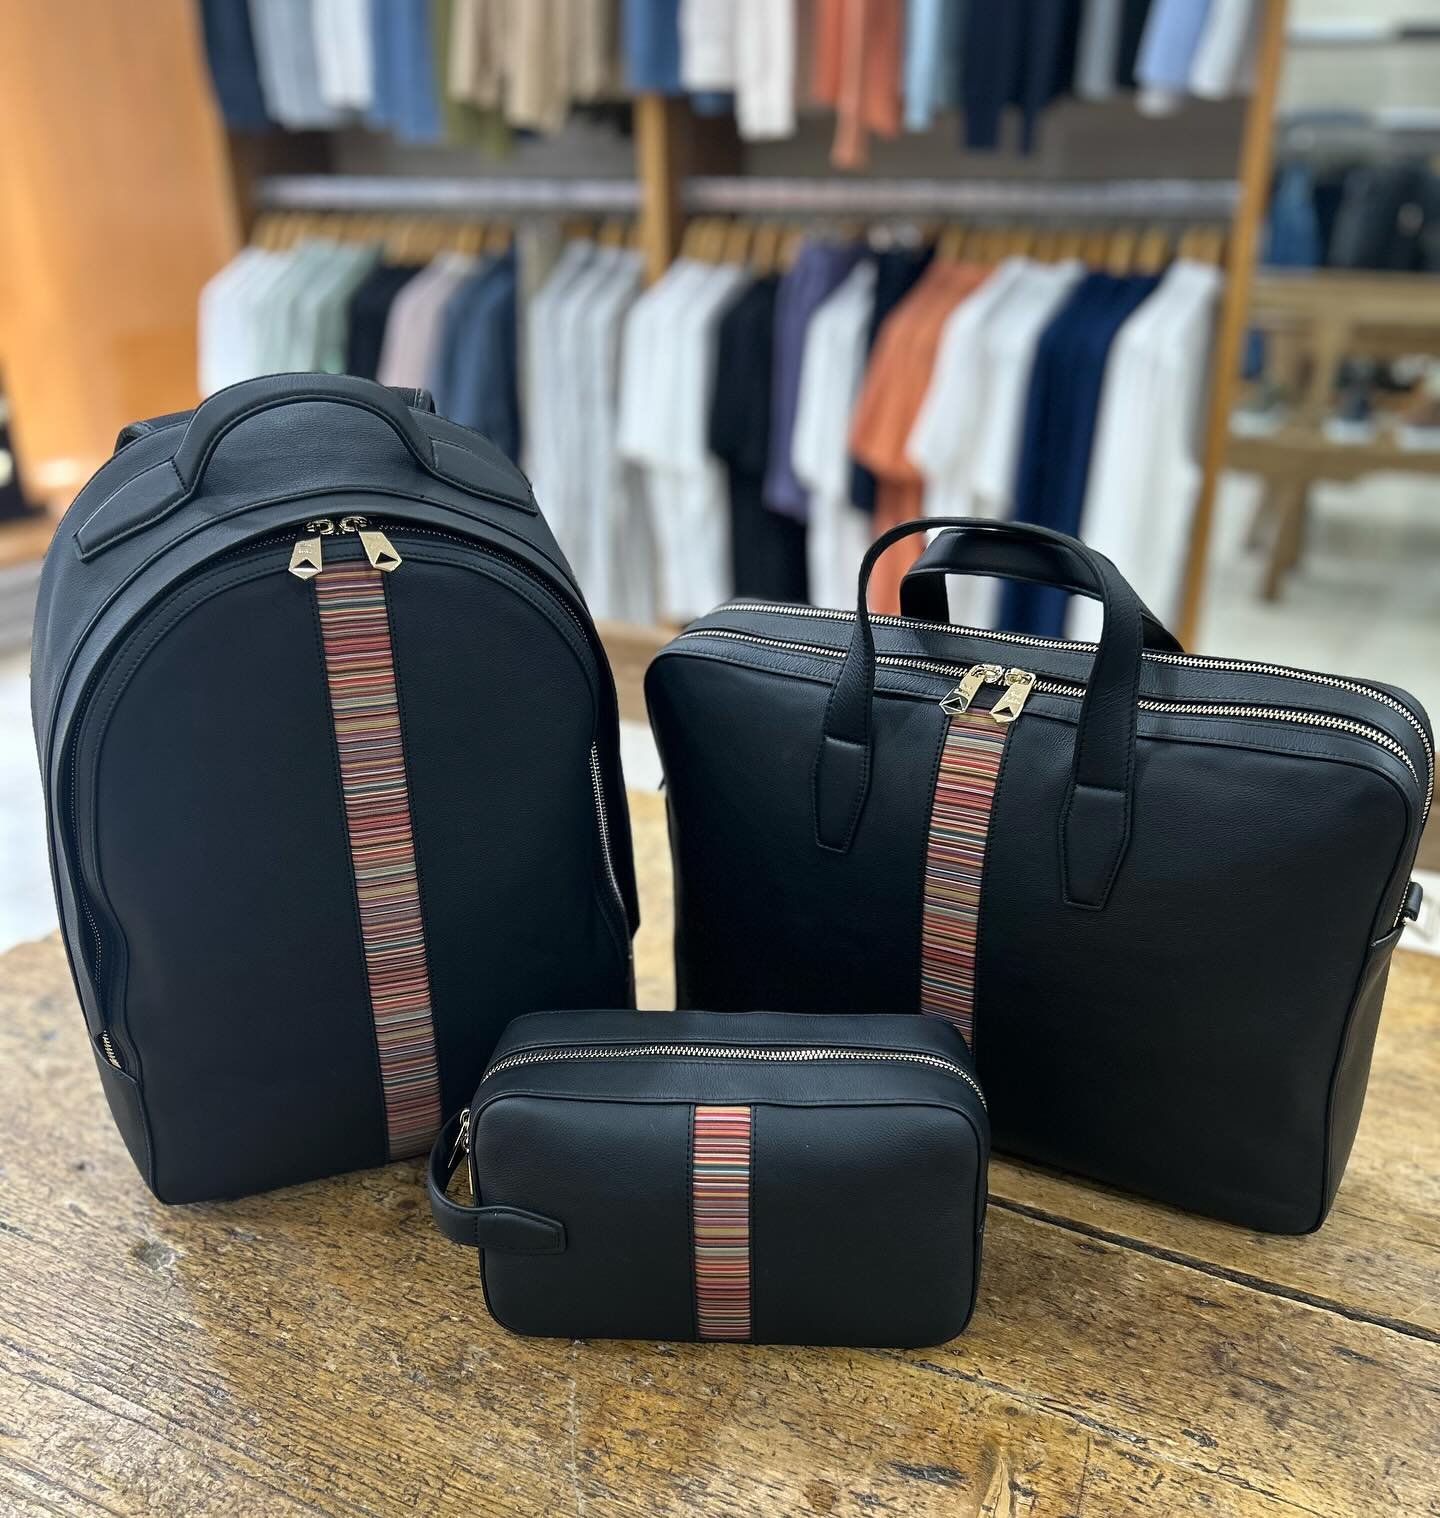 Luxury luggage from Paul Smith Mainline, available in store now. 

#paulsmithmainline #paulsmith #paulsmithdesign #signaturestripe #candystripe #washbag #backpack #leathergoods #tedwilliamsmenswear #suttoncoldfield